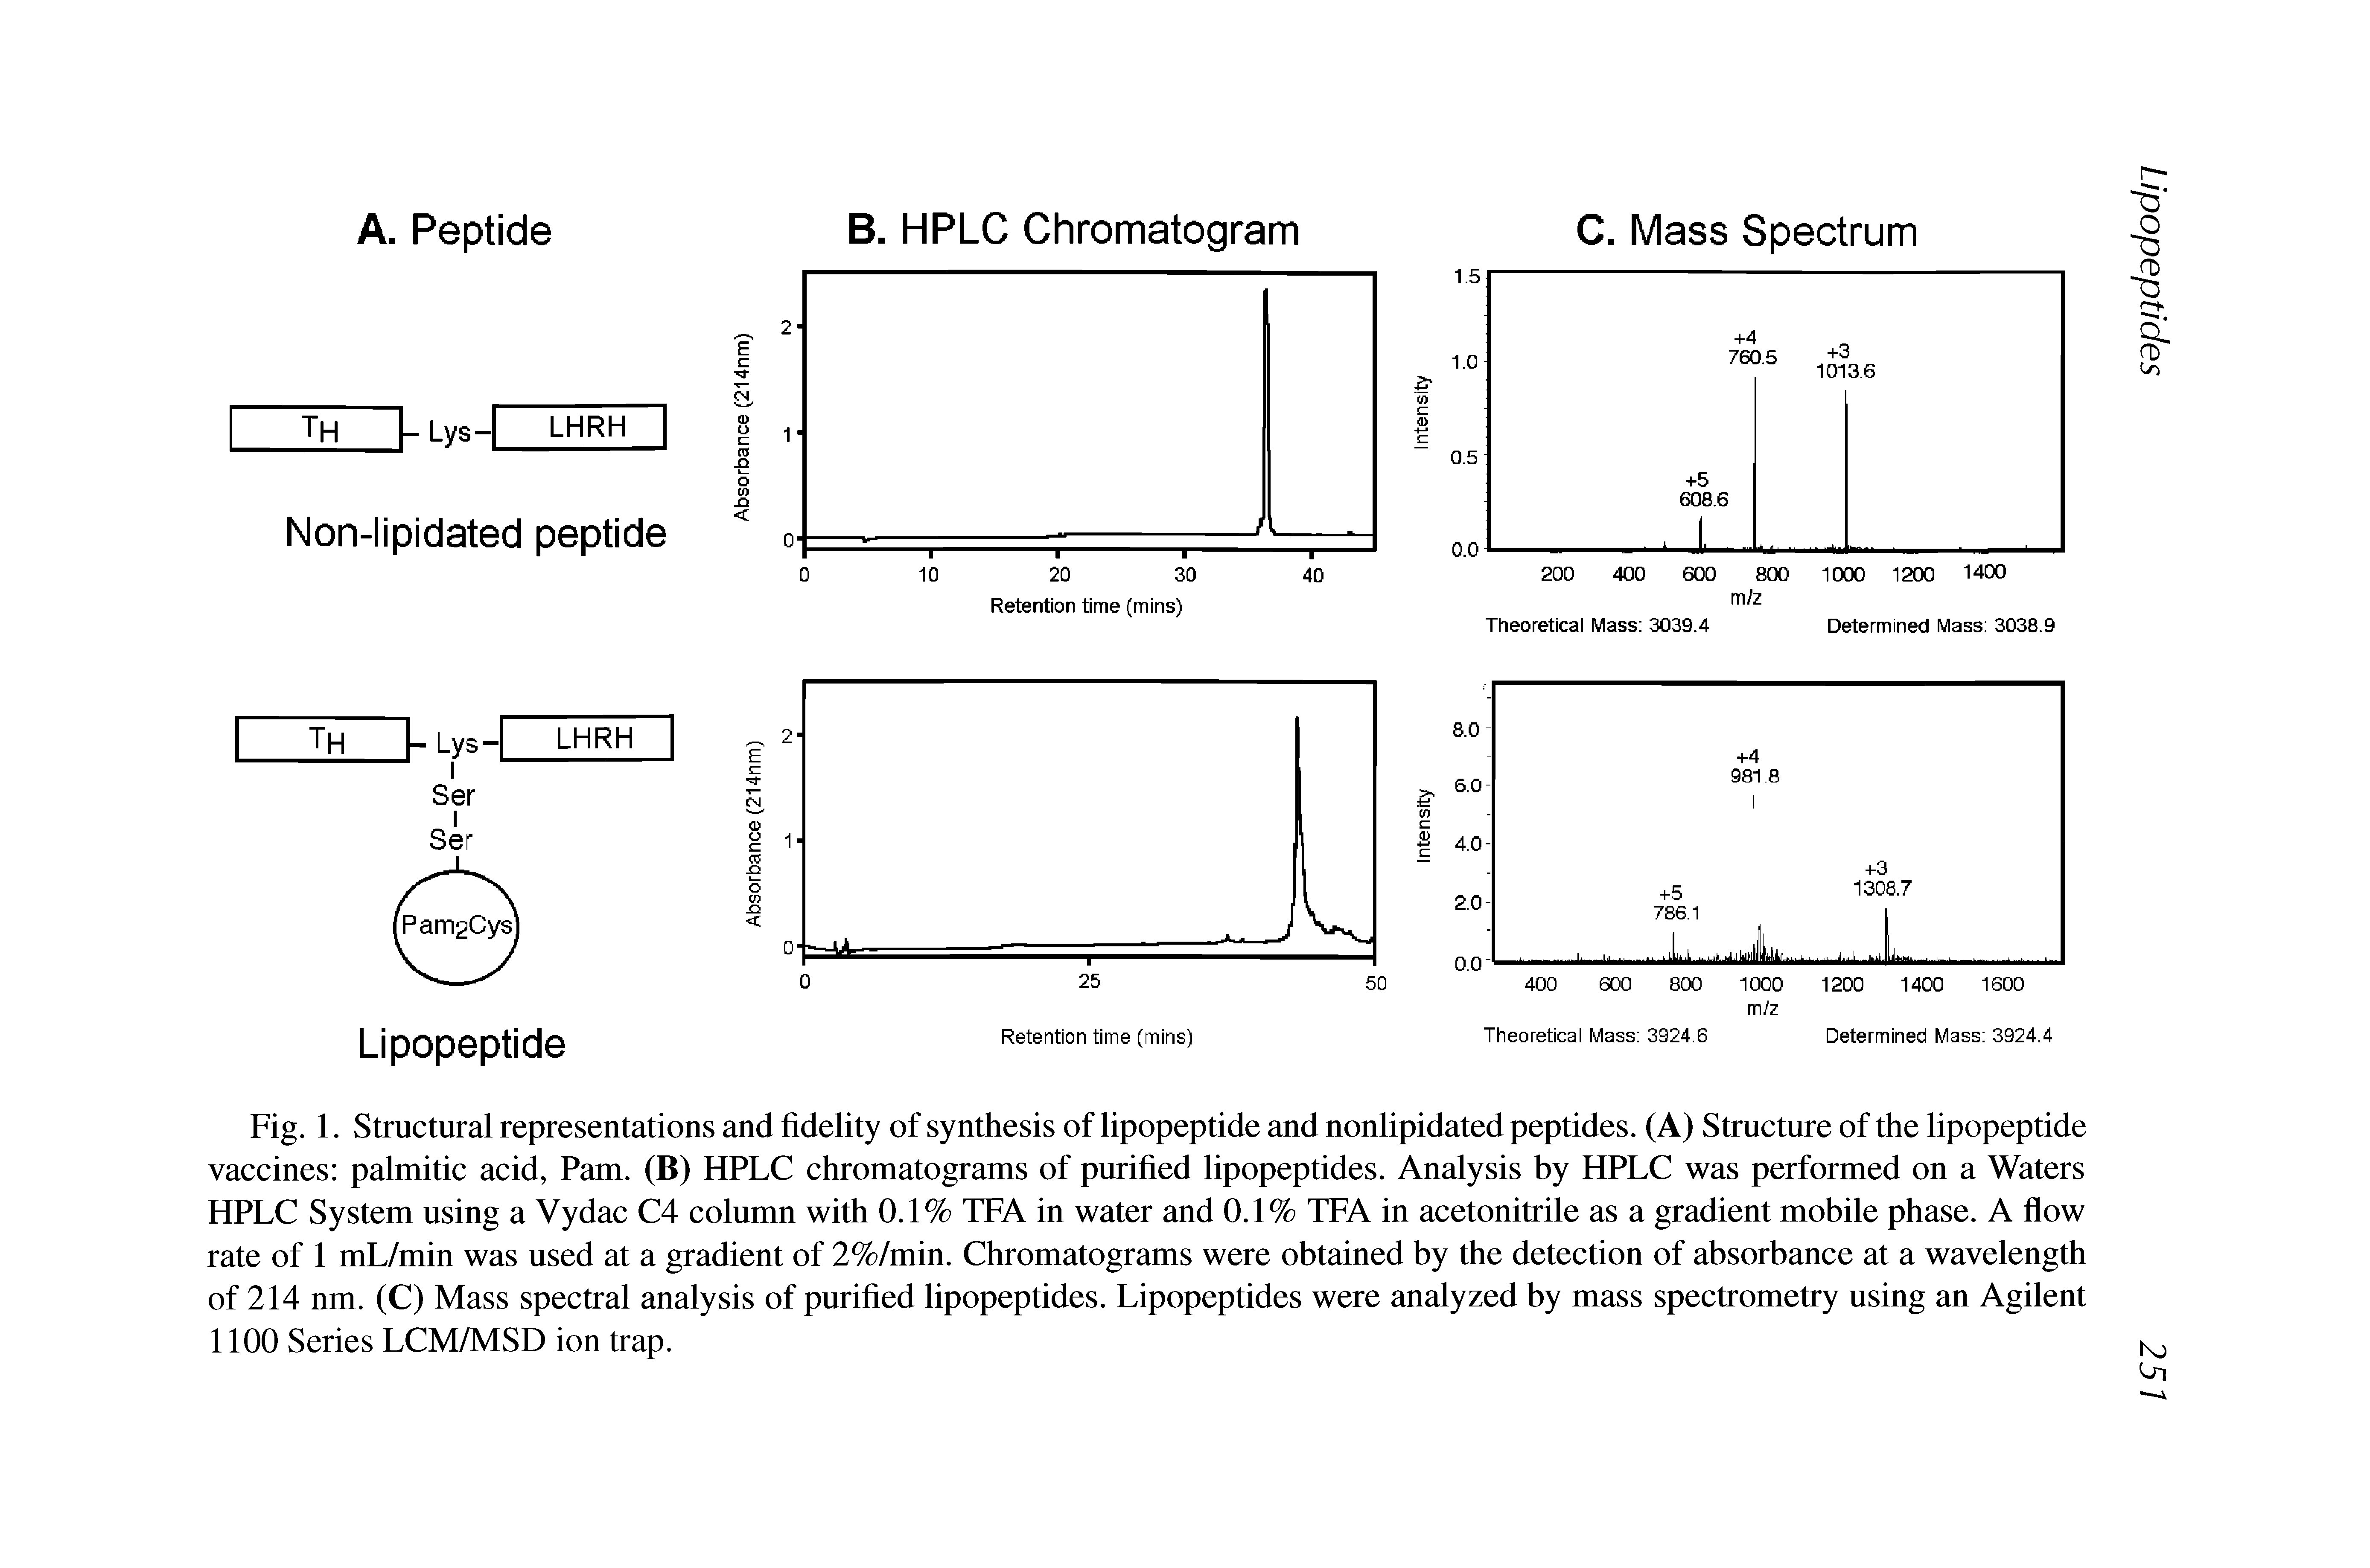 Fig. 1. Structural representations and fidelity of synthesis of lipopeptide and nonlipidated peptides. (A) Structure of the lipopeptide vaccines palmitic acid, Pam. (B) HPLC chromatograms of purified lipopeptides. Analysis by HPLC was performed on a Waters HPLC System using a Vydac C4 column with 0.1% TFA in water and 0.1% TFA in acetonitrile as a gradient mobile phase. A flow rate of 1 mL/min was used at a gradient of 2%/min. Chromatograms were obtained by the detection of absorbance at a wavelength of 214 nm. (C) Mass spectral analysis of purified lipopeptides. Lipopeptides were analyzed by mass spectrometry using an Agilent 1100 Series LCM/MSD ion trap.